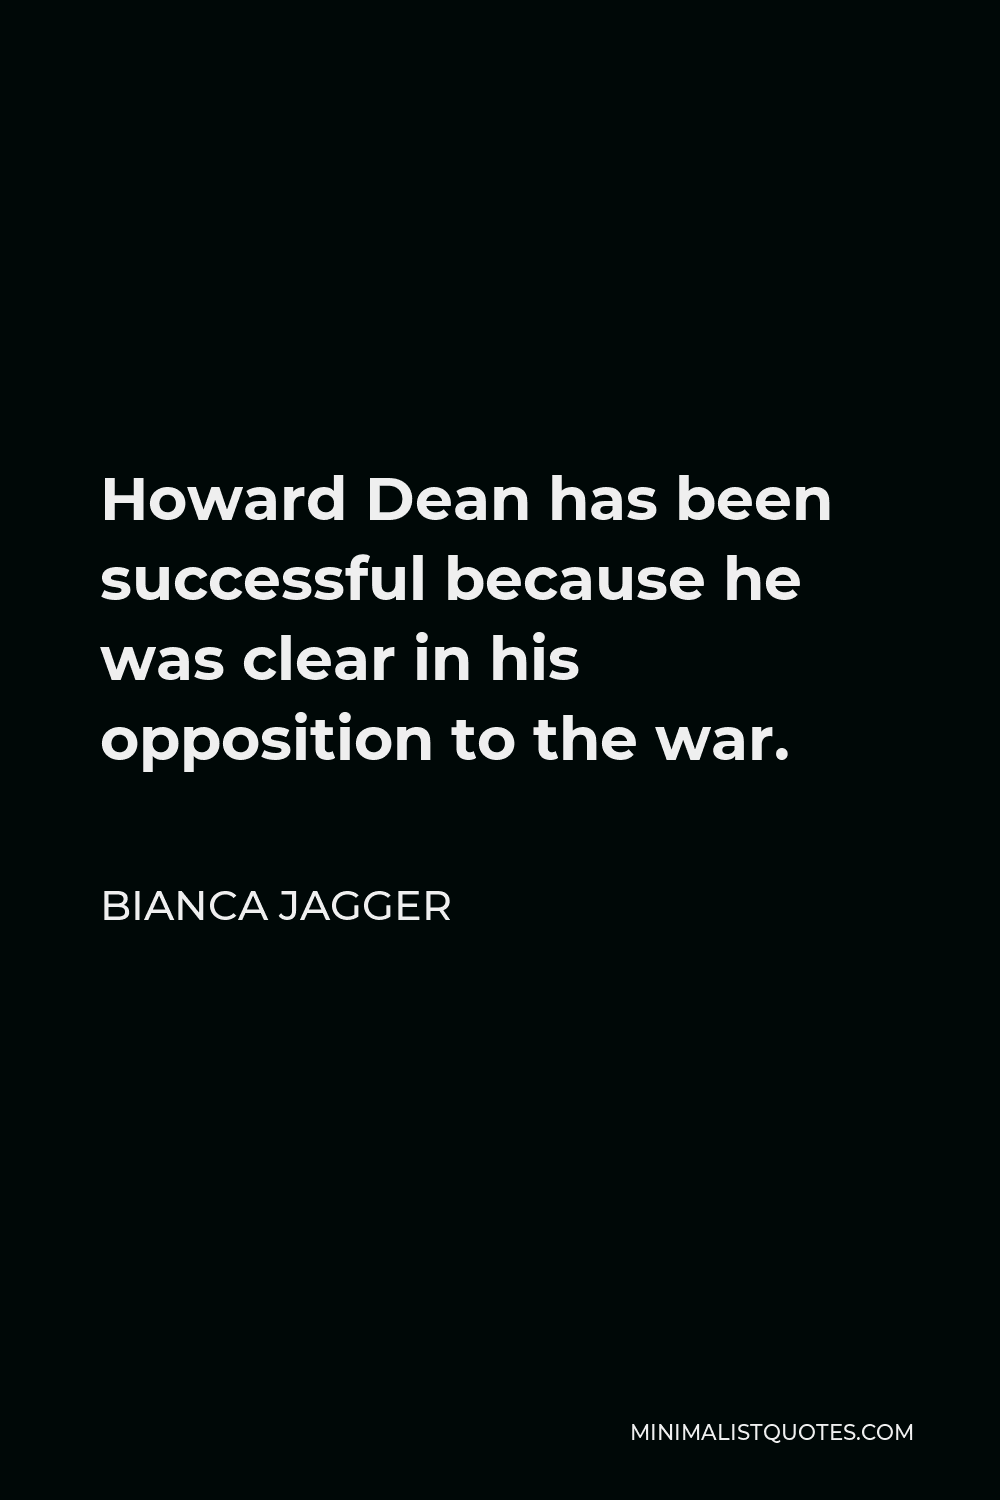 Bianca Jagger Quote - Howard Dean has been successful because he was clear in his opposition to the war.